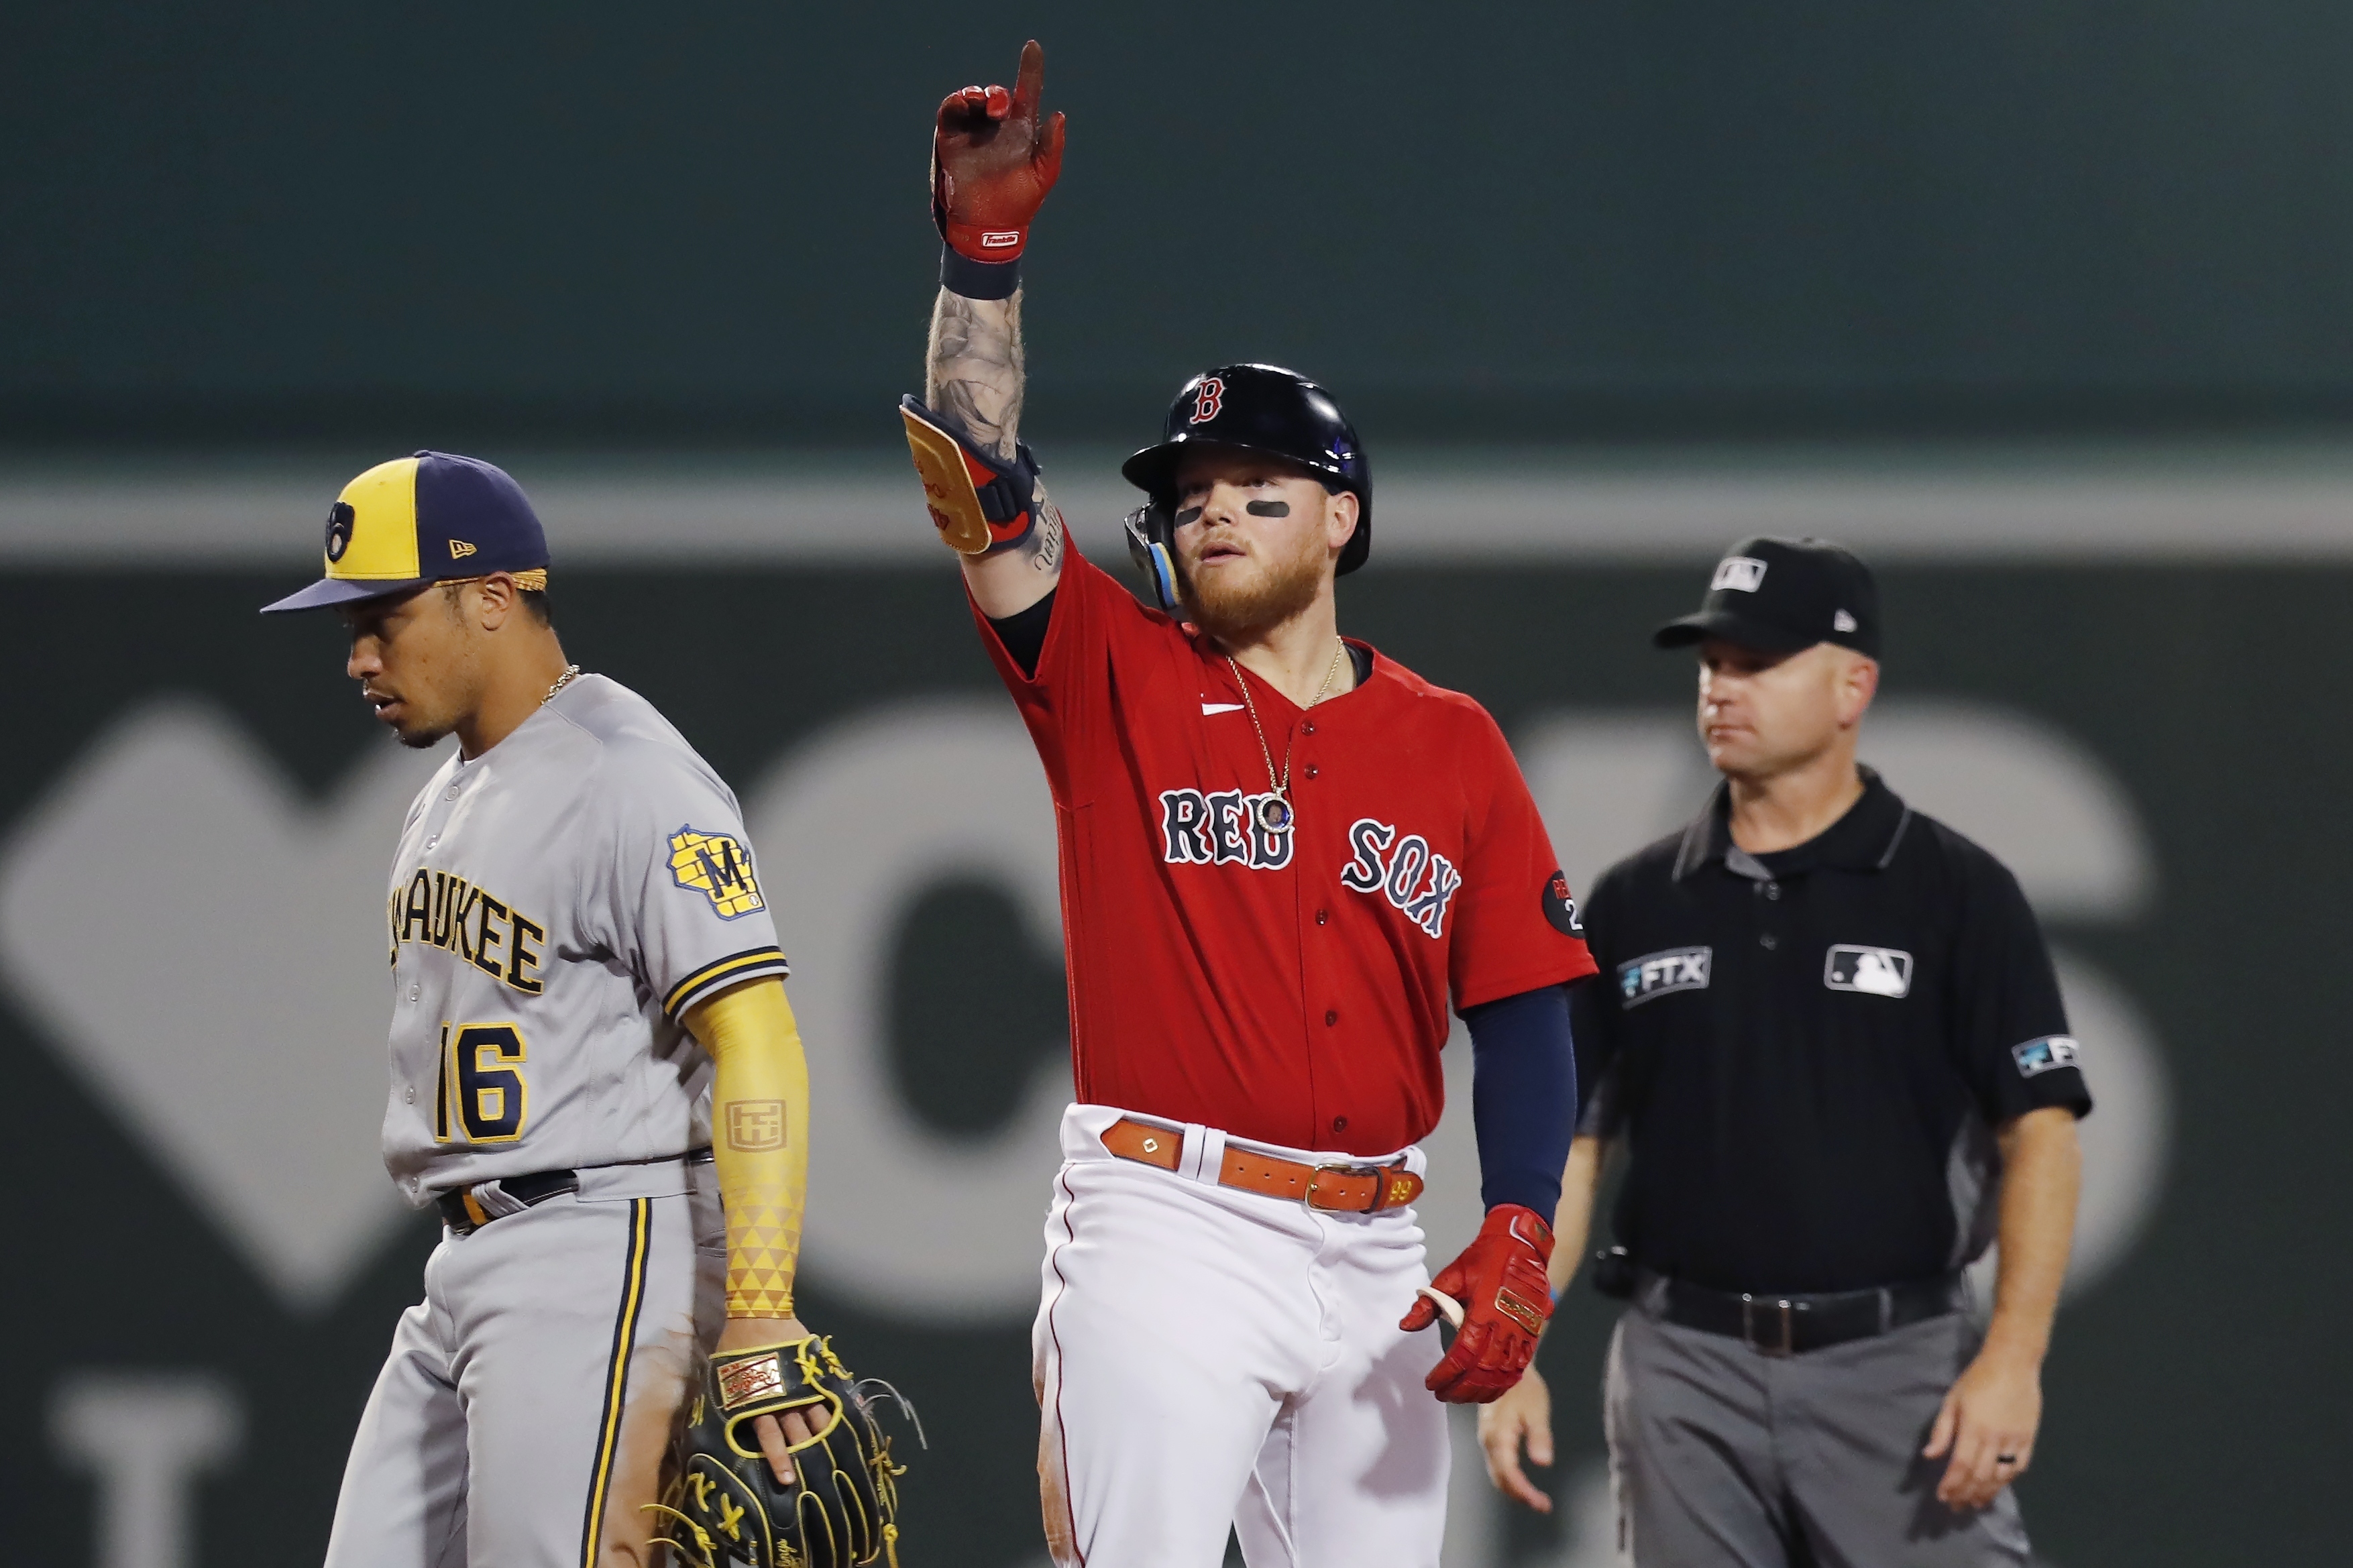 WATCH: Boston Red Sox' Alex Verdugo Accomplishes This For The First Time -  Fastball